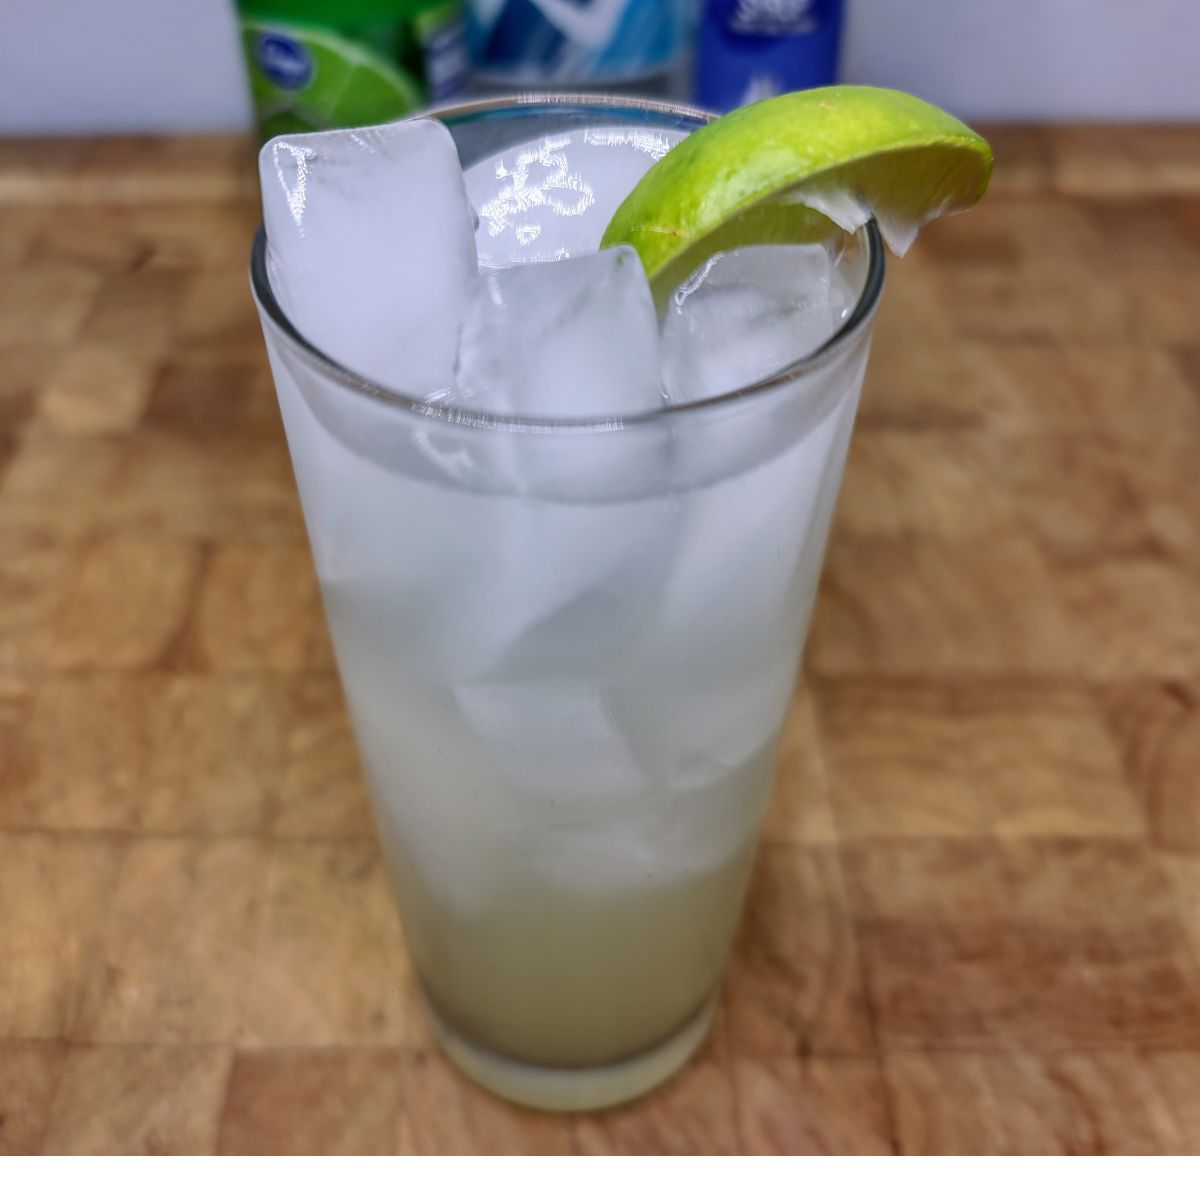 Virgin Lime Rickey with a lime wedge on the glass and ingredients in the background.